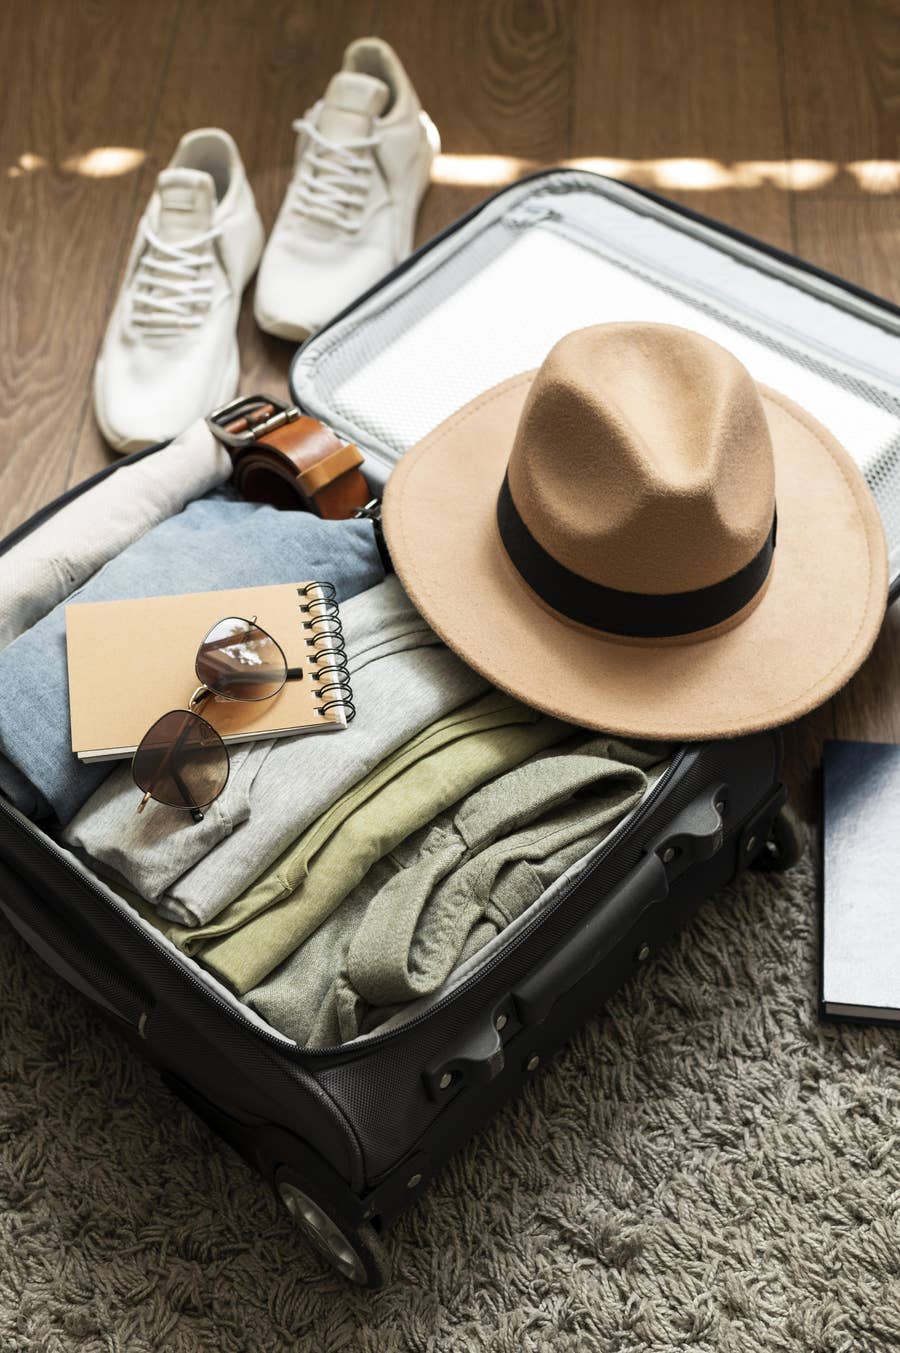 How to Pack Light for Europe (or Anywhere): 12 Mindset Tricks +